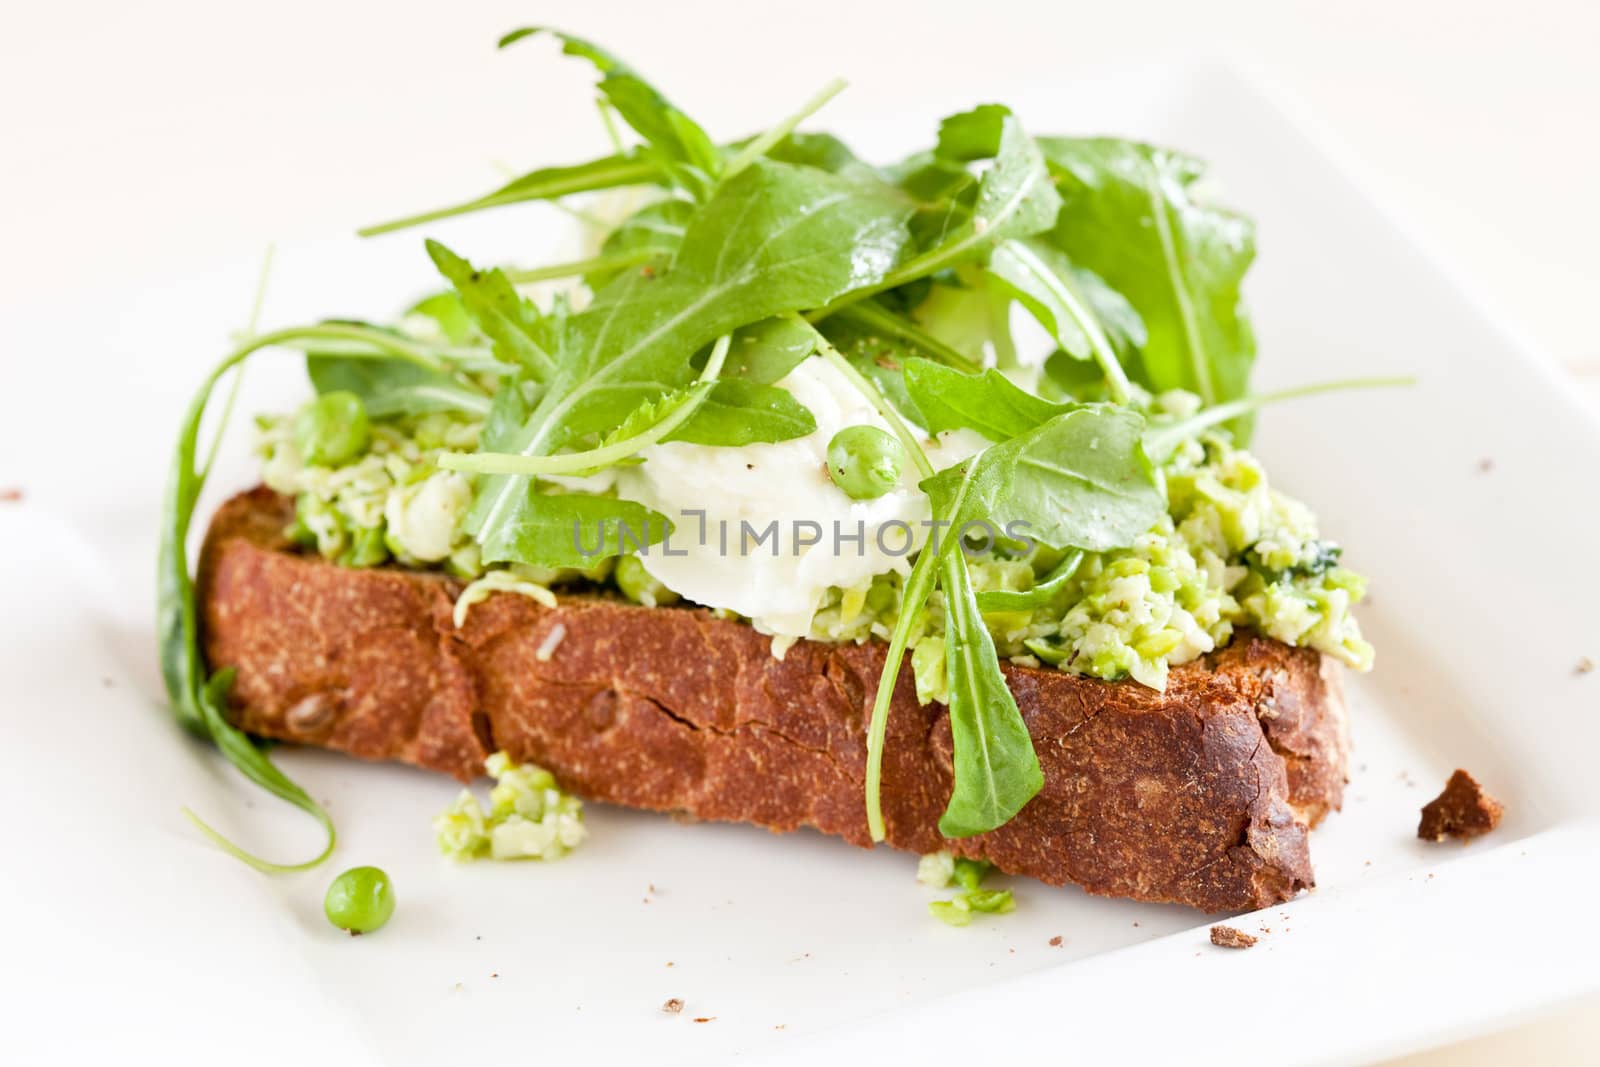 Crostini with a puree of peas and broadbeans topped with mozarella and wild rocket